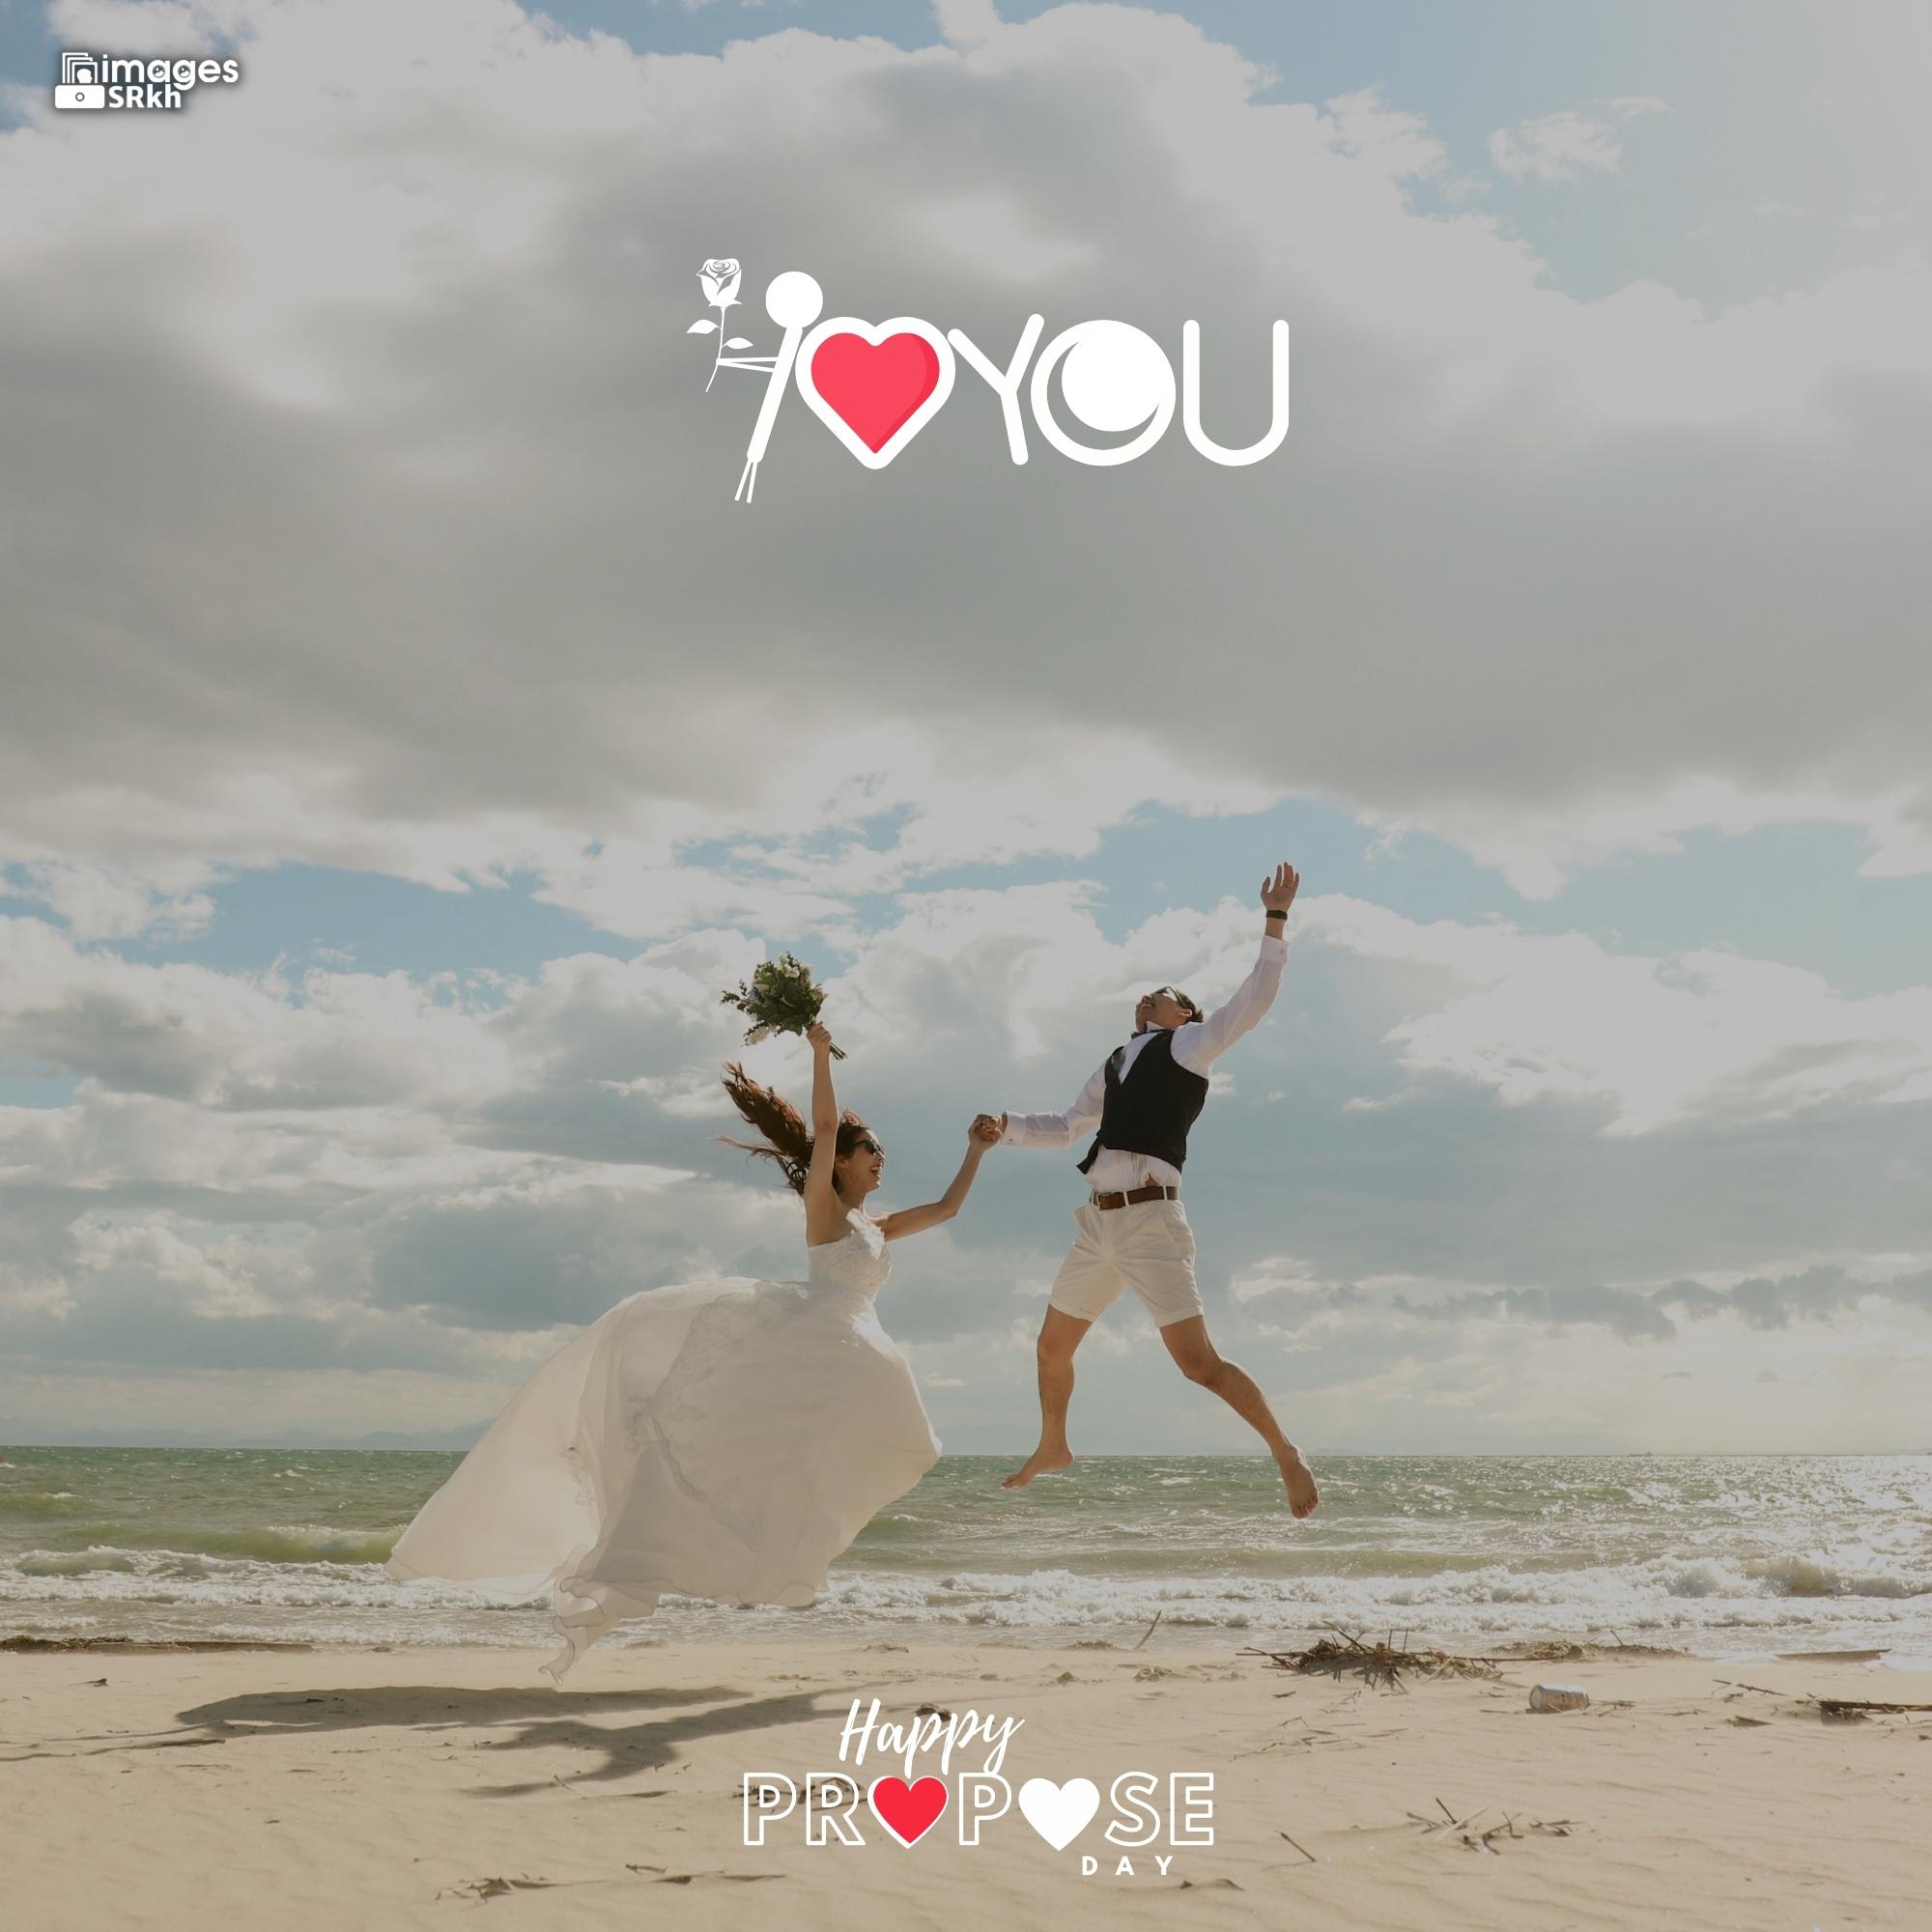 Happy Propose Day Images | 336 | I LOVE YOU